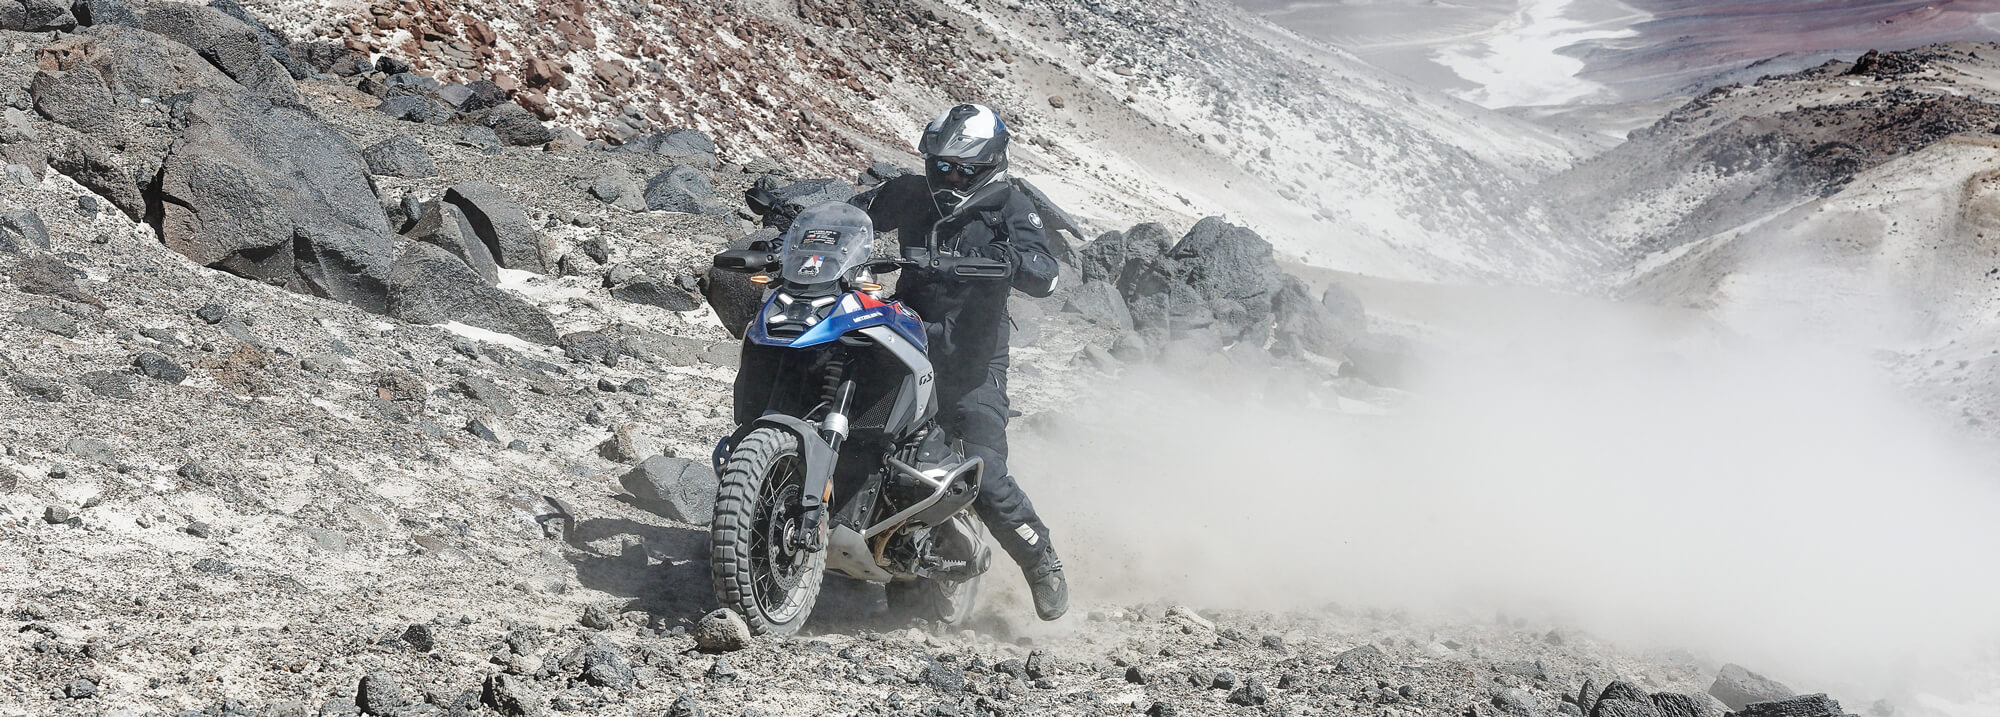 BMW Motorrad climbs highest active volcano with new R1300GS video-banner